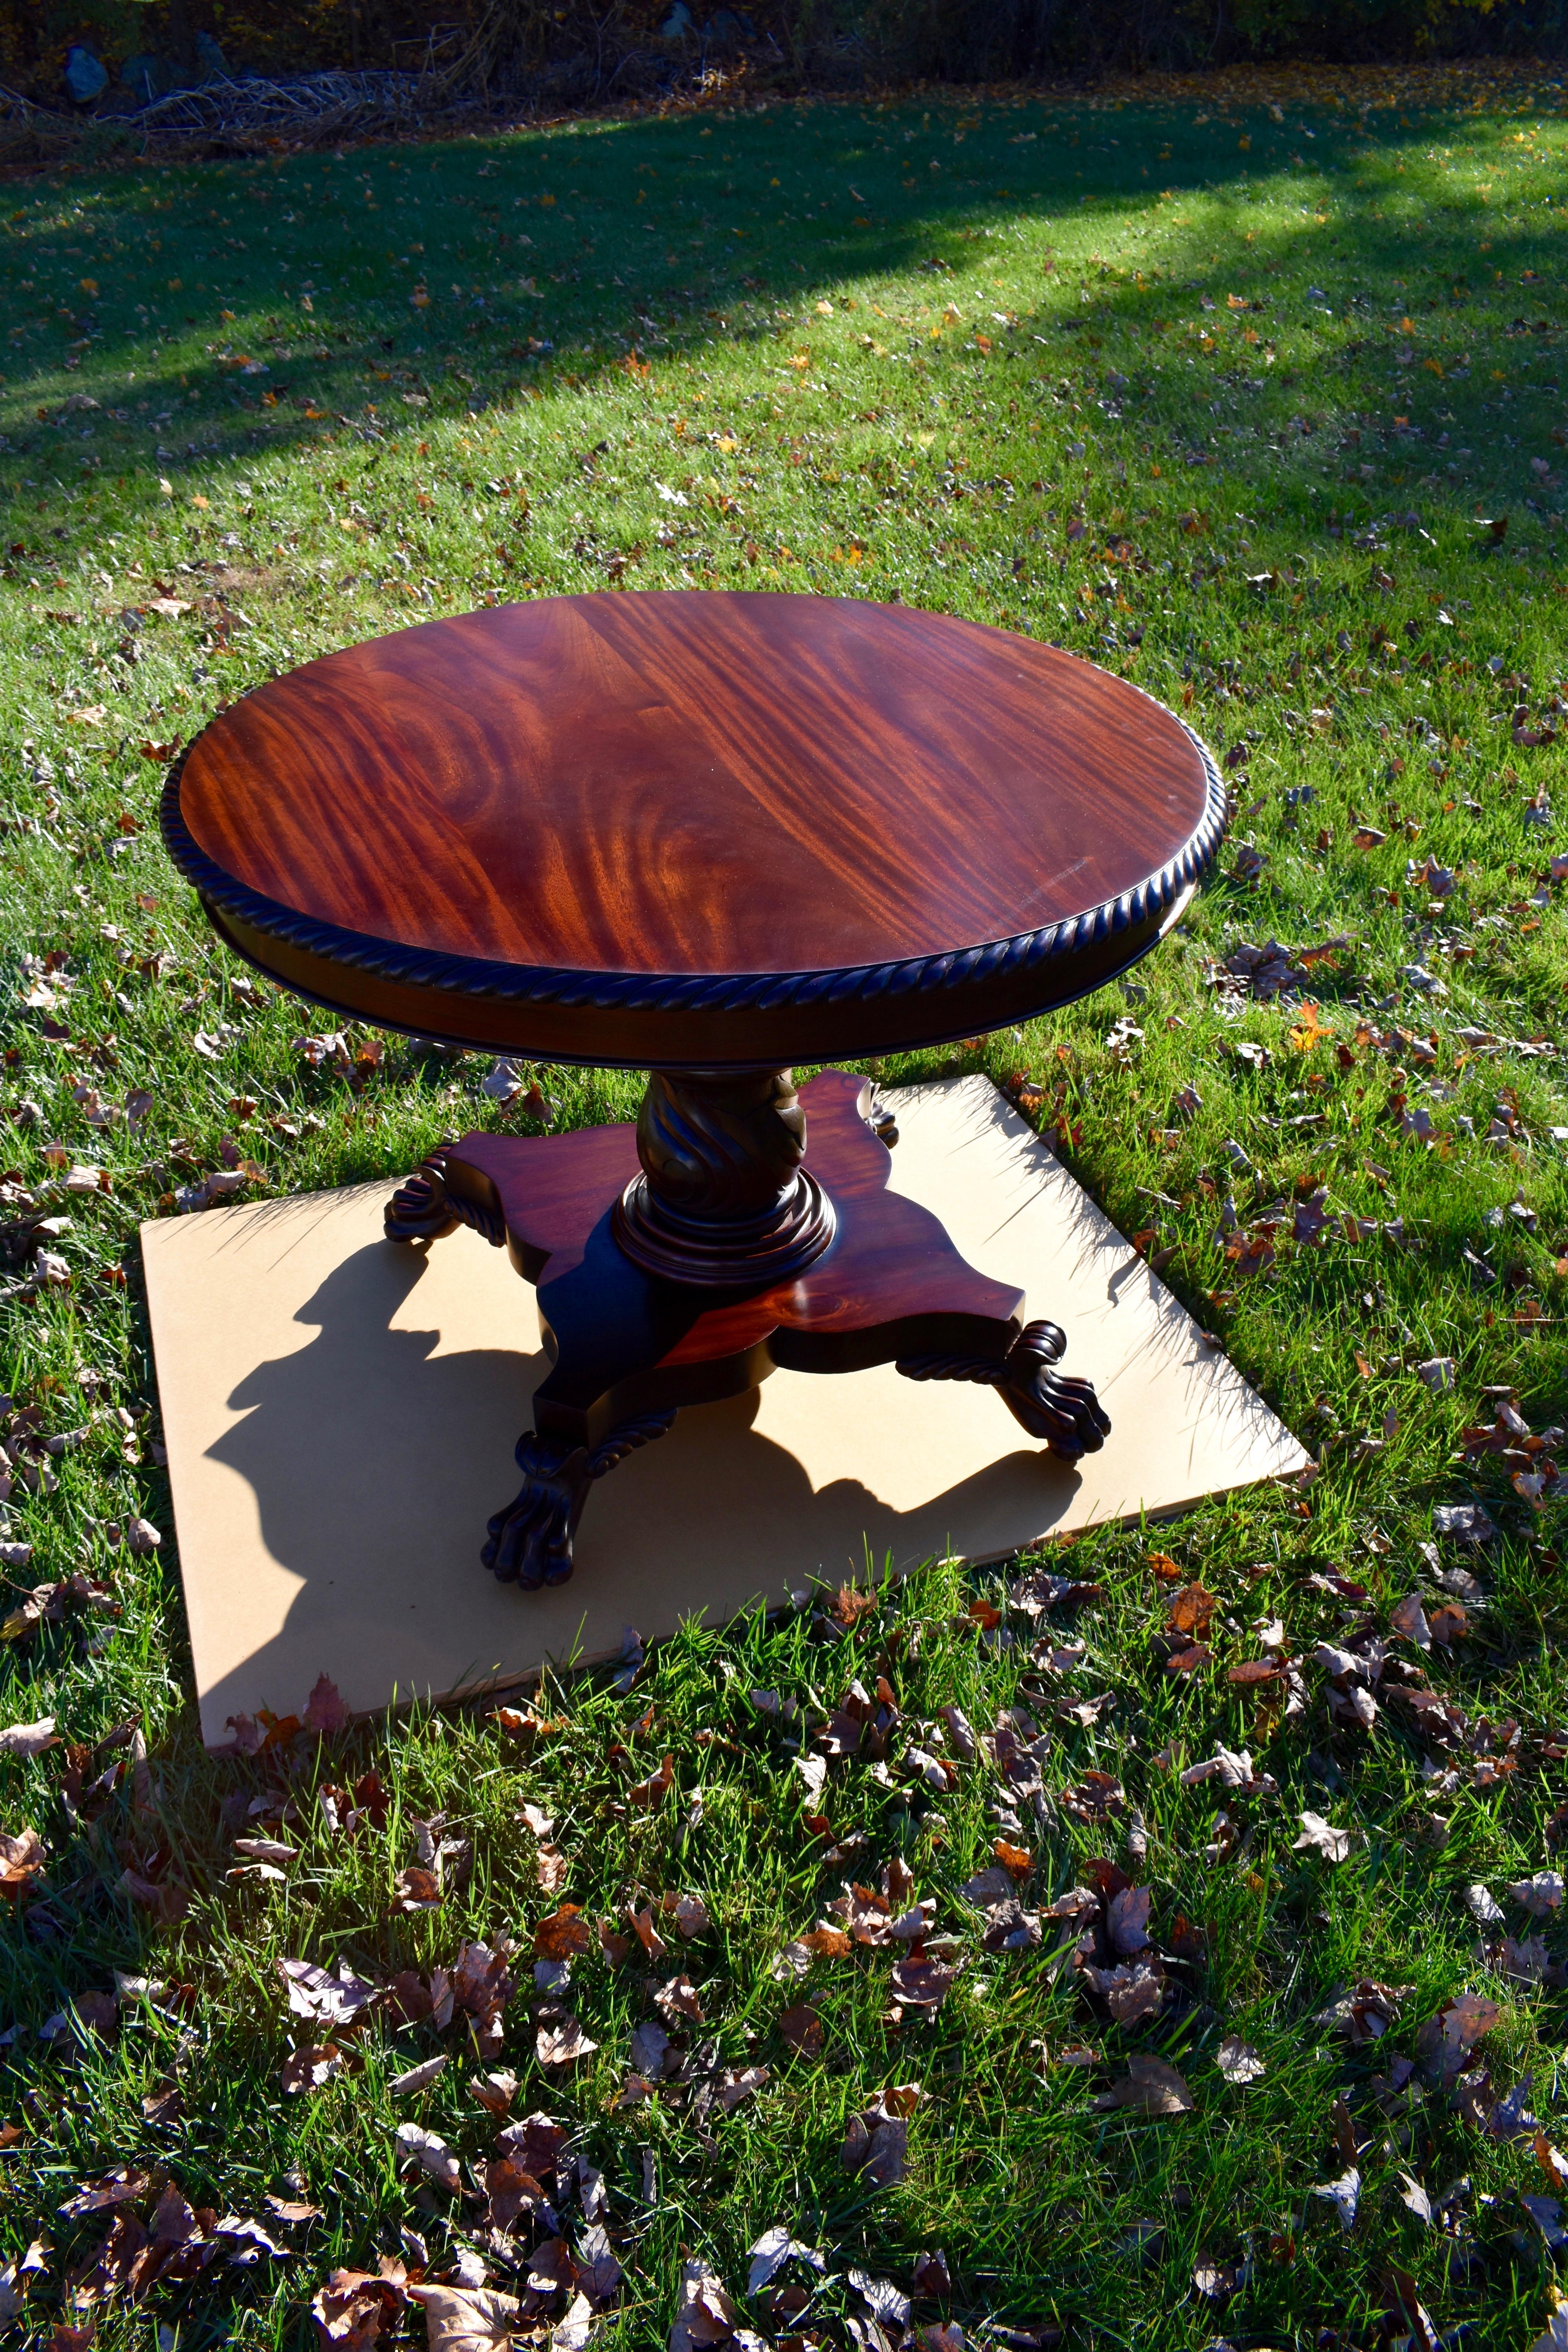 19th century round Regency mahogany table with lion paw feet, rope twist border. (1890) this is a fine example with the top recently refinished and base was brightened as well. Top can be removed by a series of screws. Feet also have metal caster